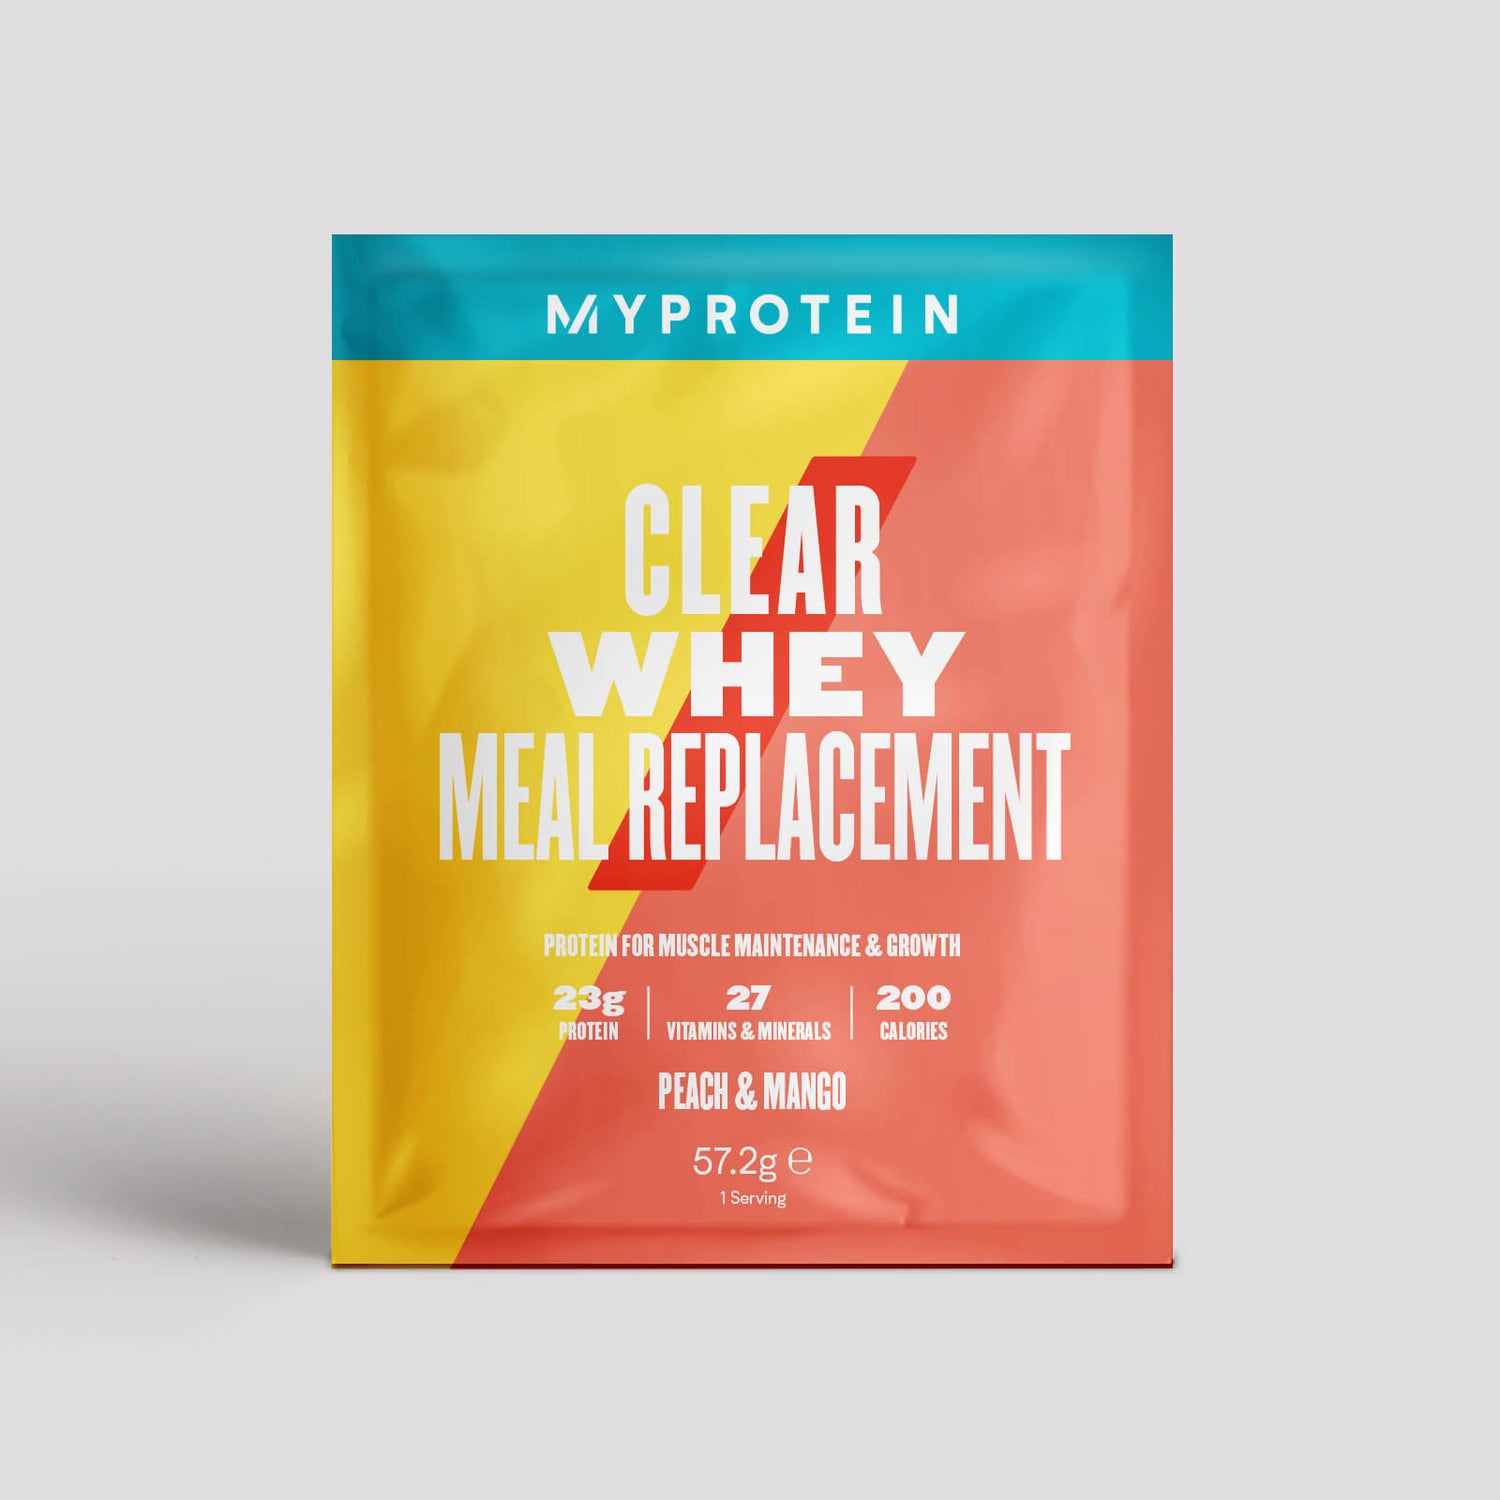 Myprotein Clear Whey Meal Replacement Shake, (Sample) - Broskyňa & Mango